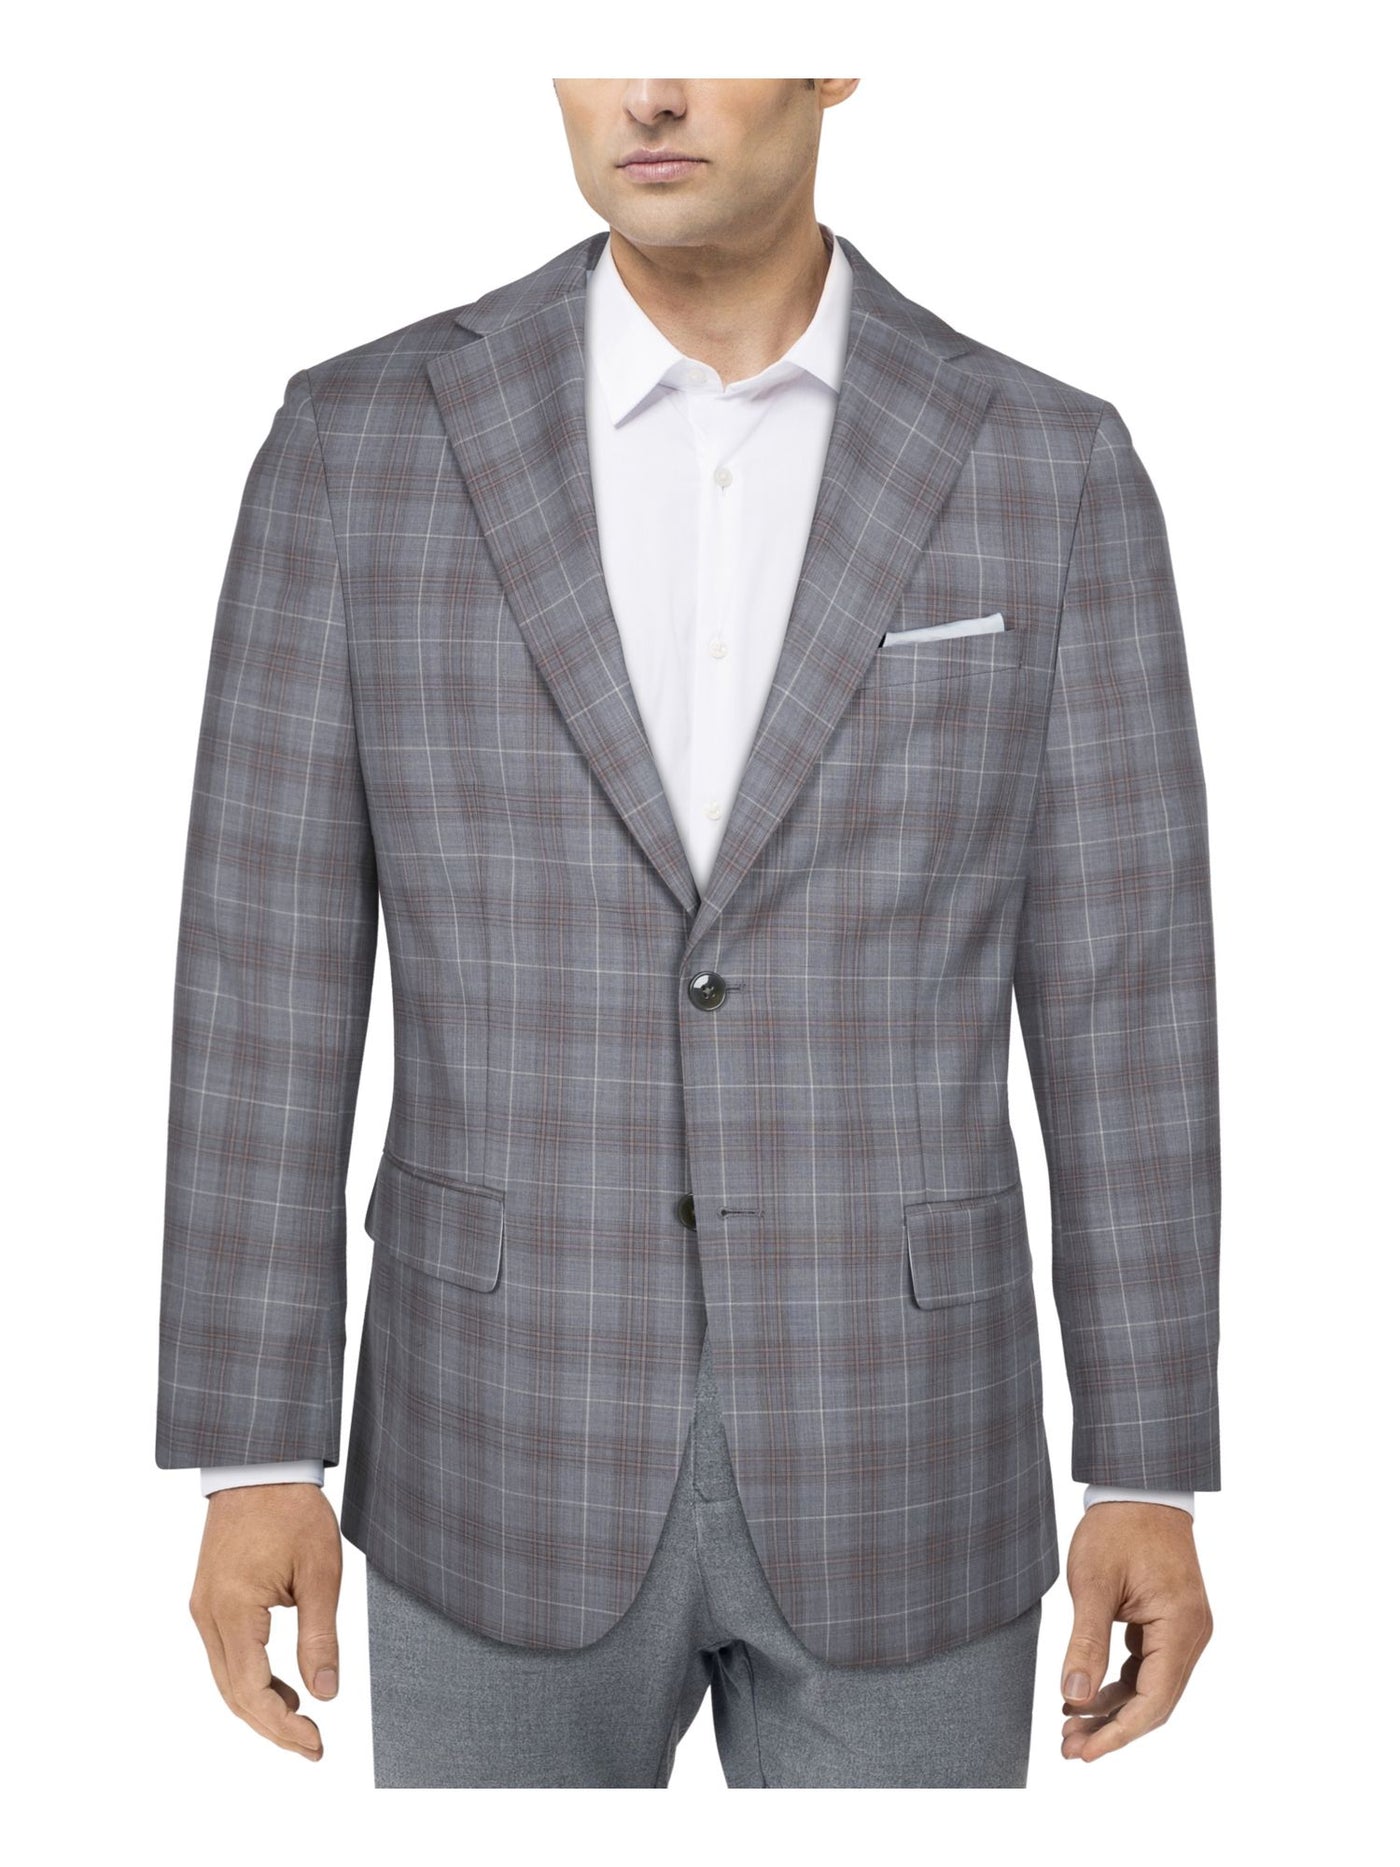 TALLIA Mens Gray Lined Single Breasted Plaid Slim Fit Stretch Suit Separate Blazer Jacket 38L